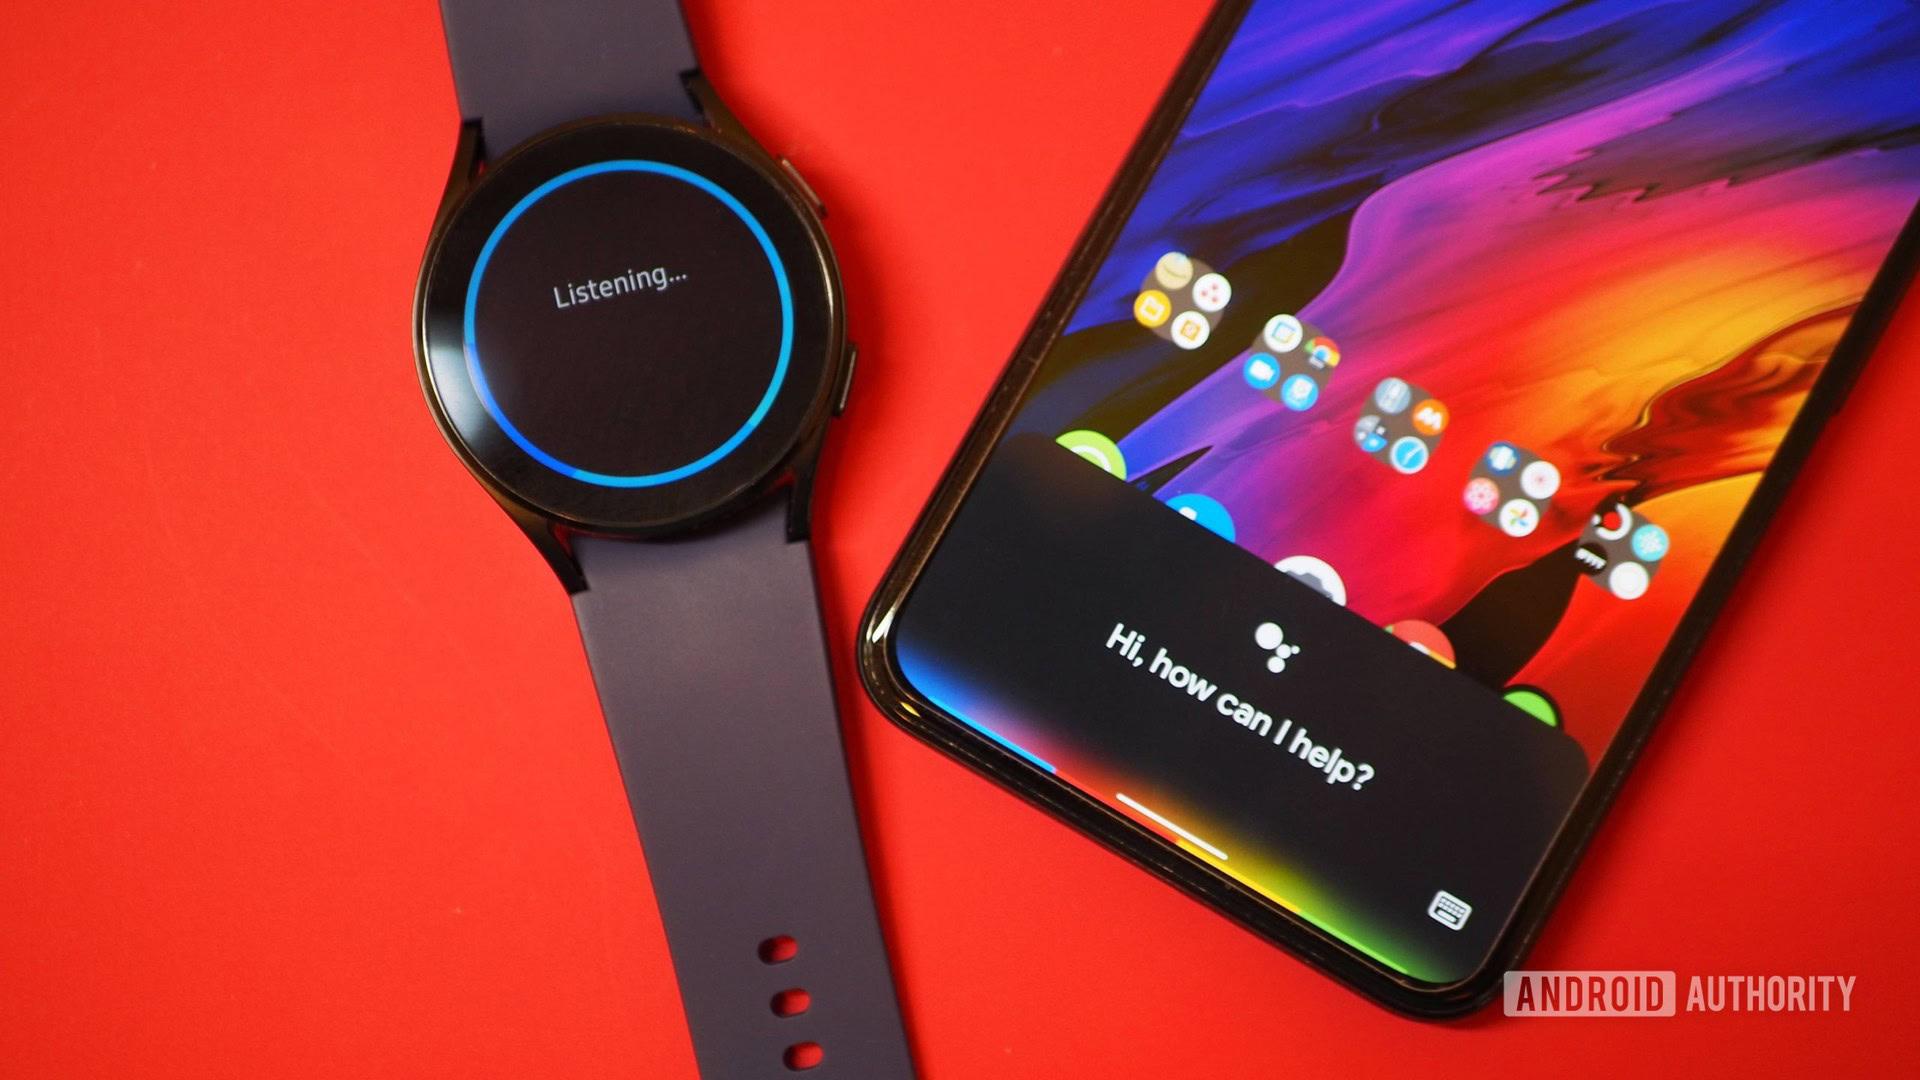 Samsung Galaxy Watch 4 with Bixby, next to Google Pixel 5 with Assistant. Red background.